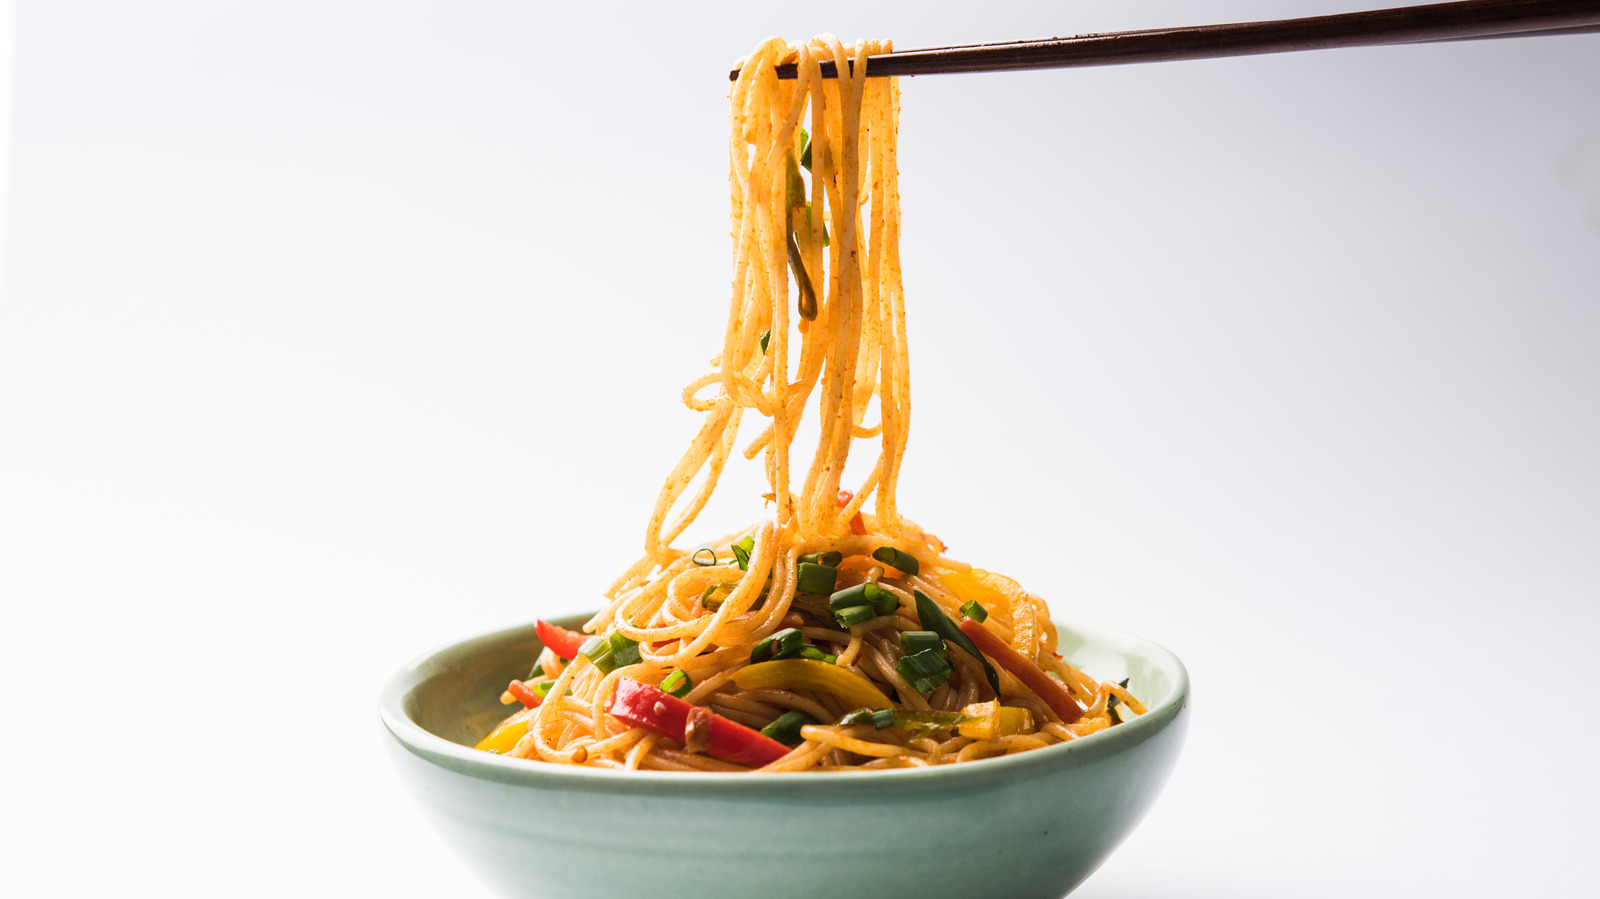 Chow Fun Vs Chow Mein: What Are The Differences?